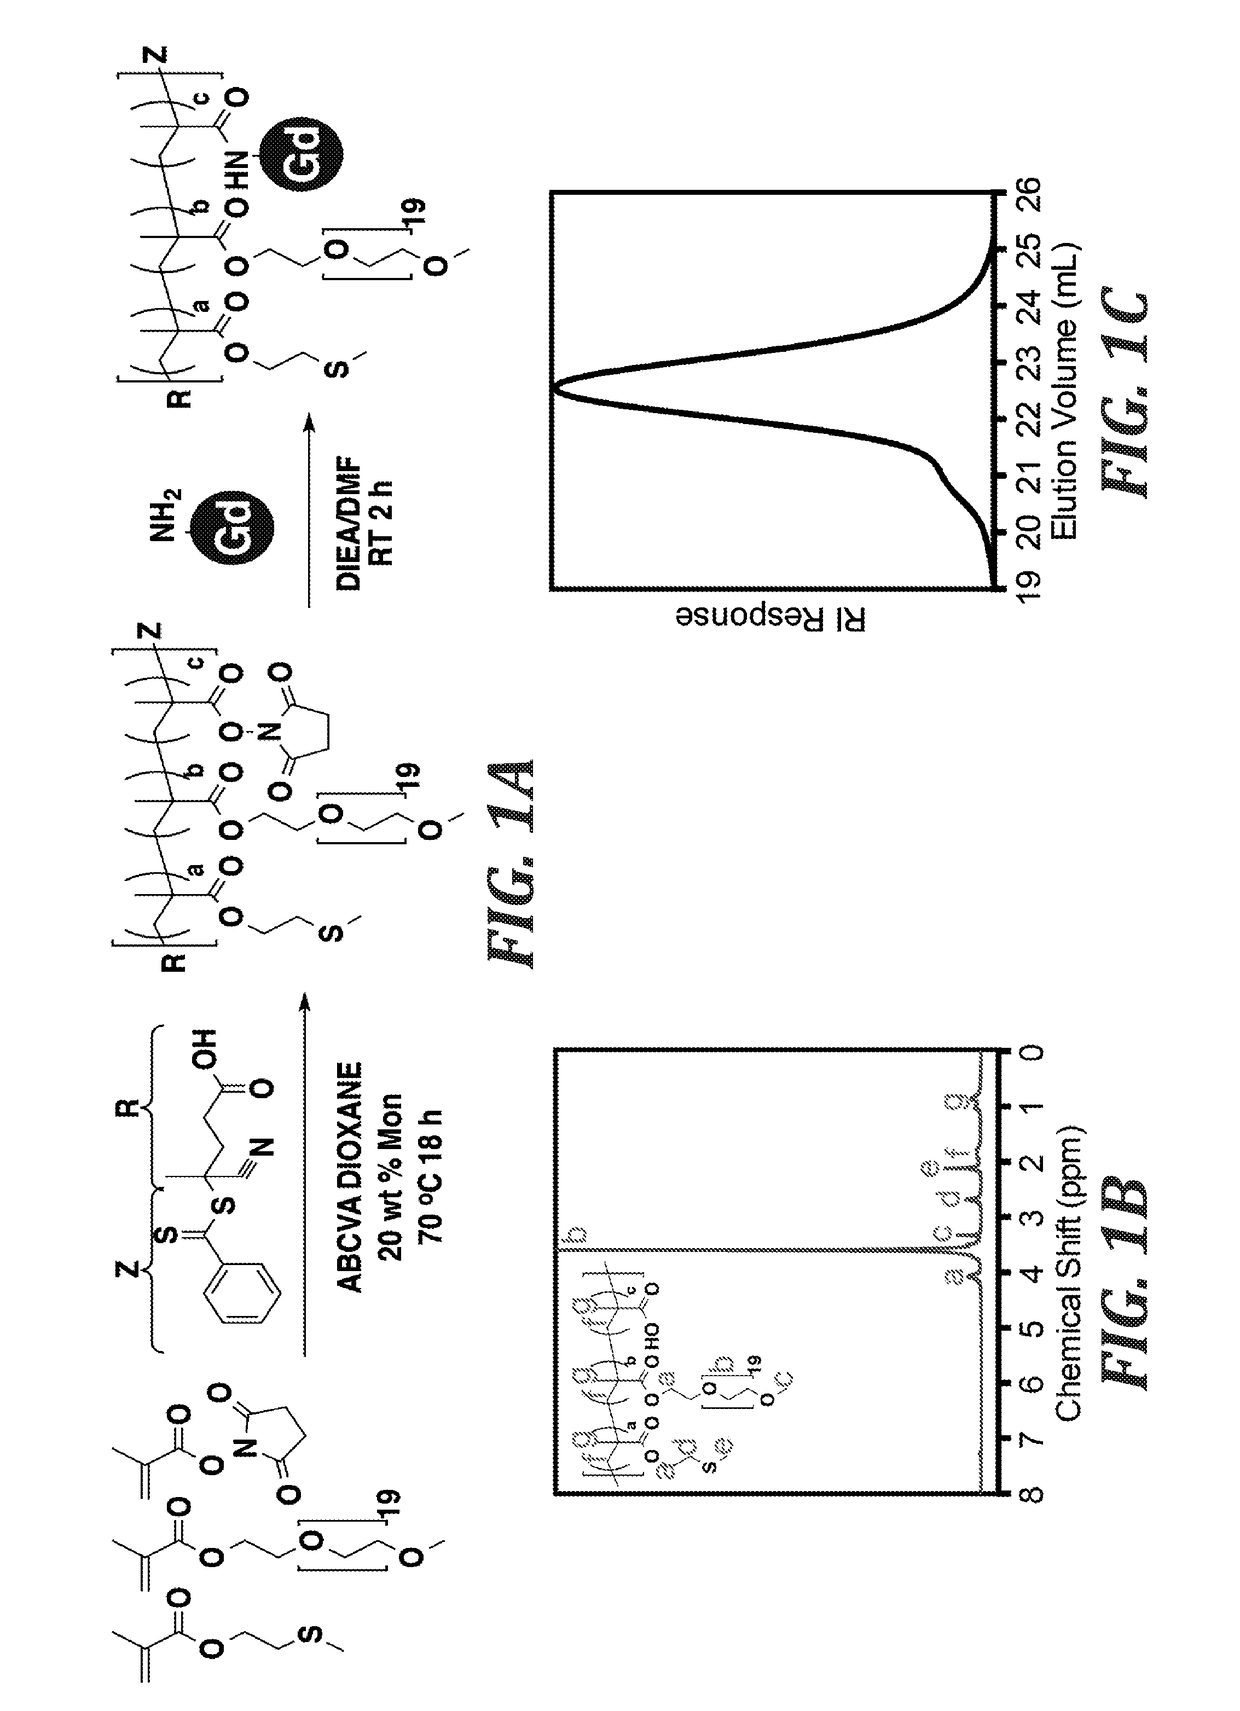 Oxygen reactive polymers for treatment of traumatic brain injury